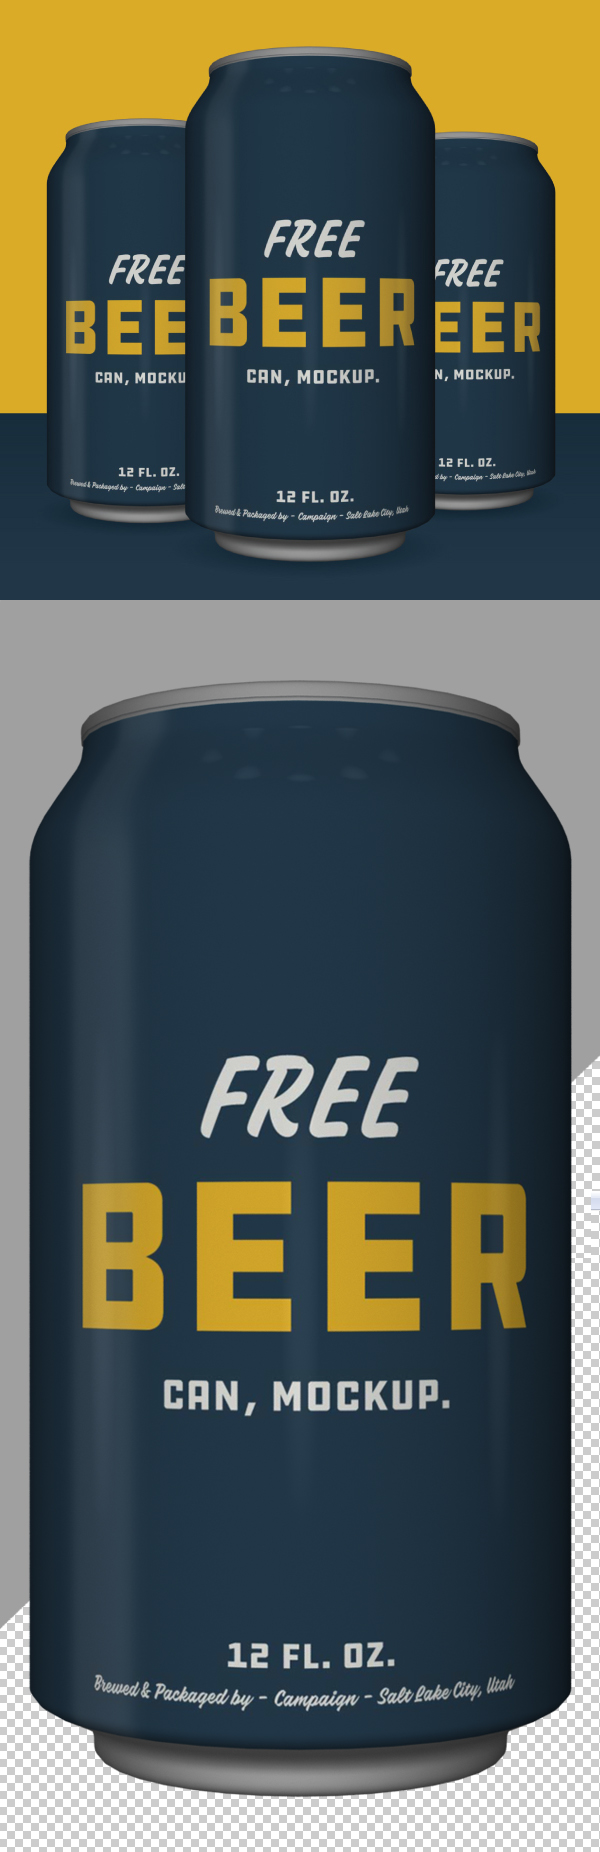 Free Can Mockup PSD Template